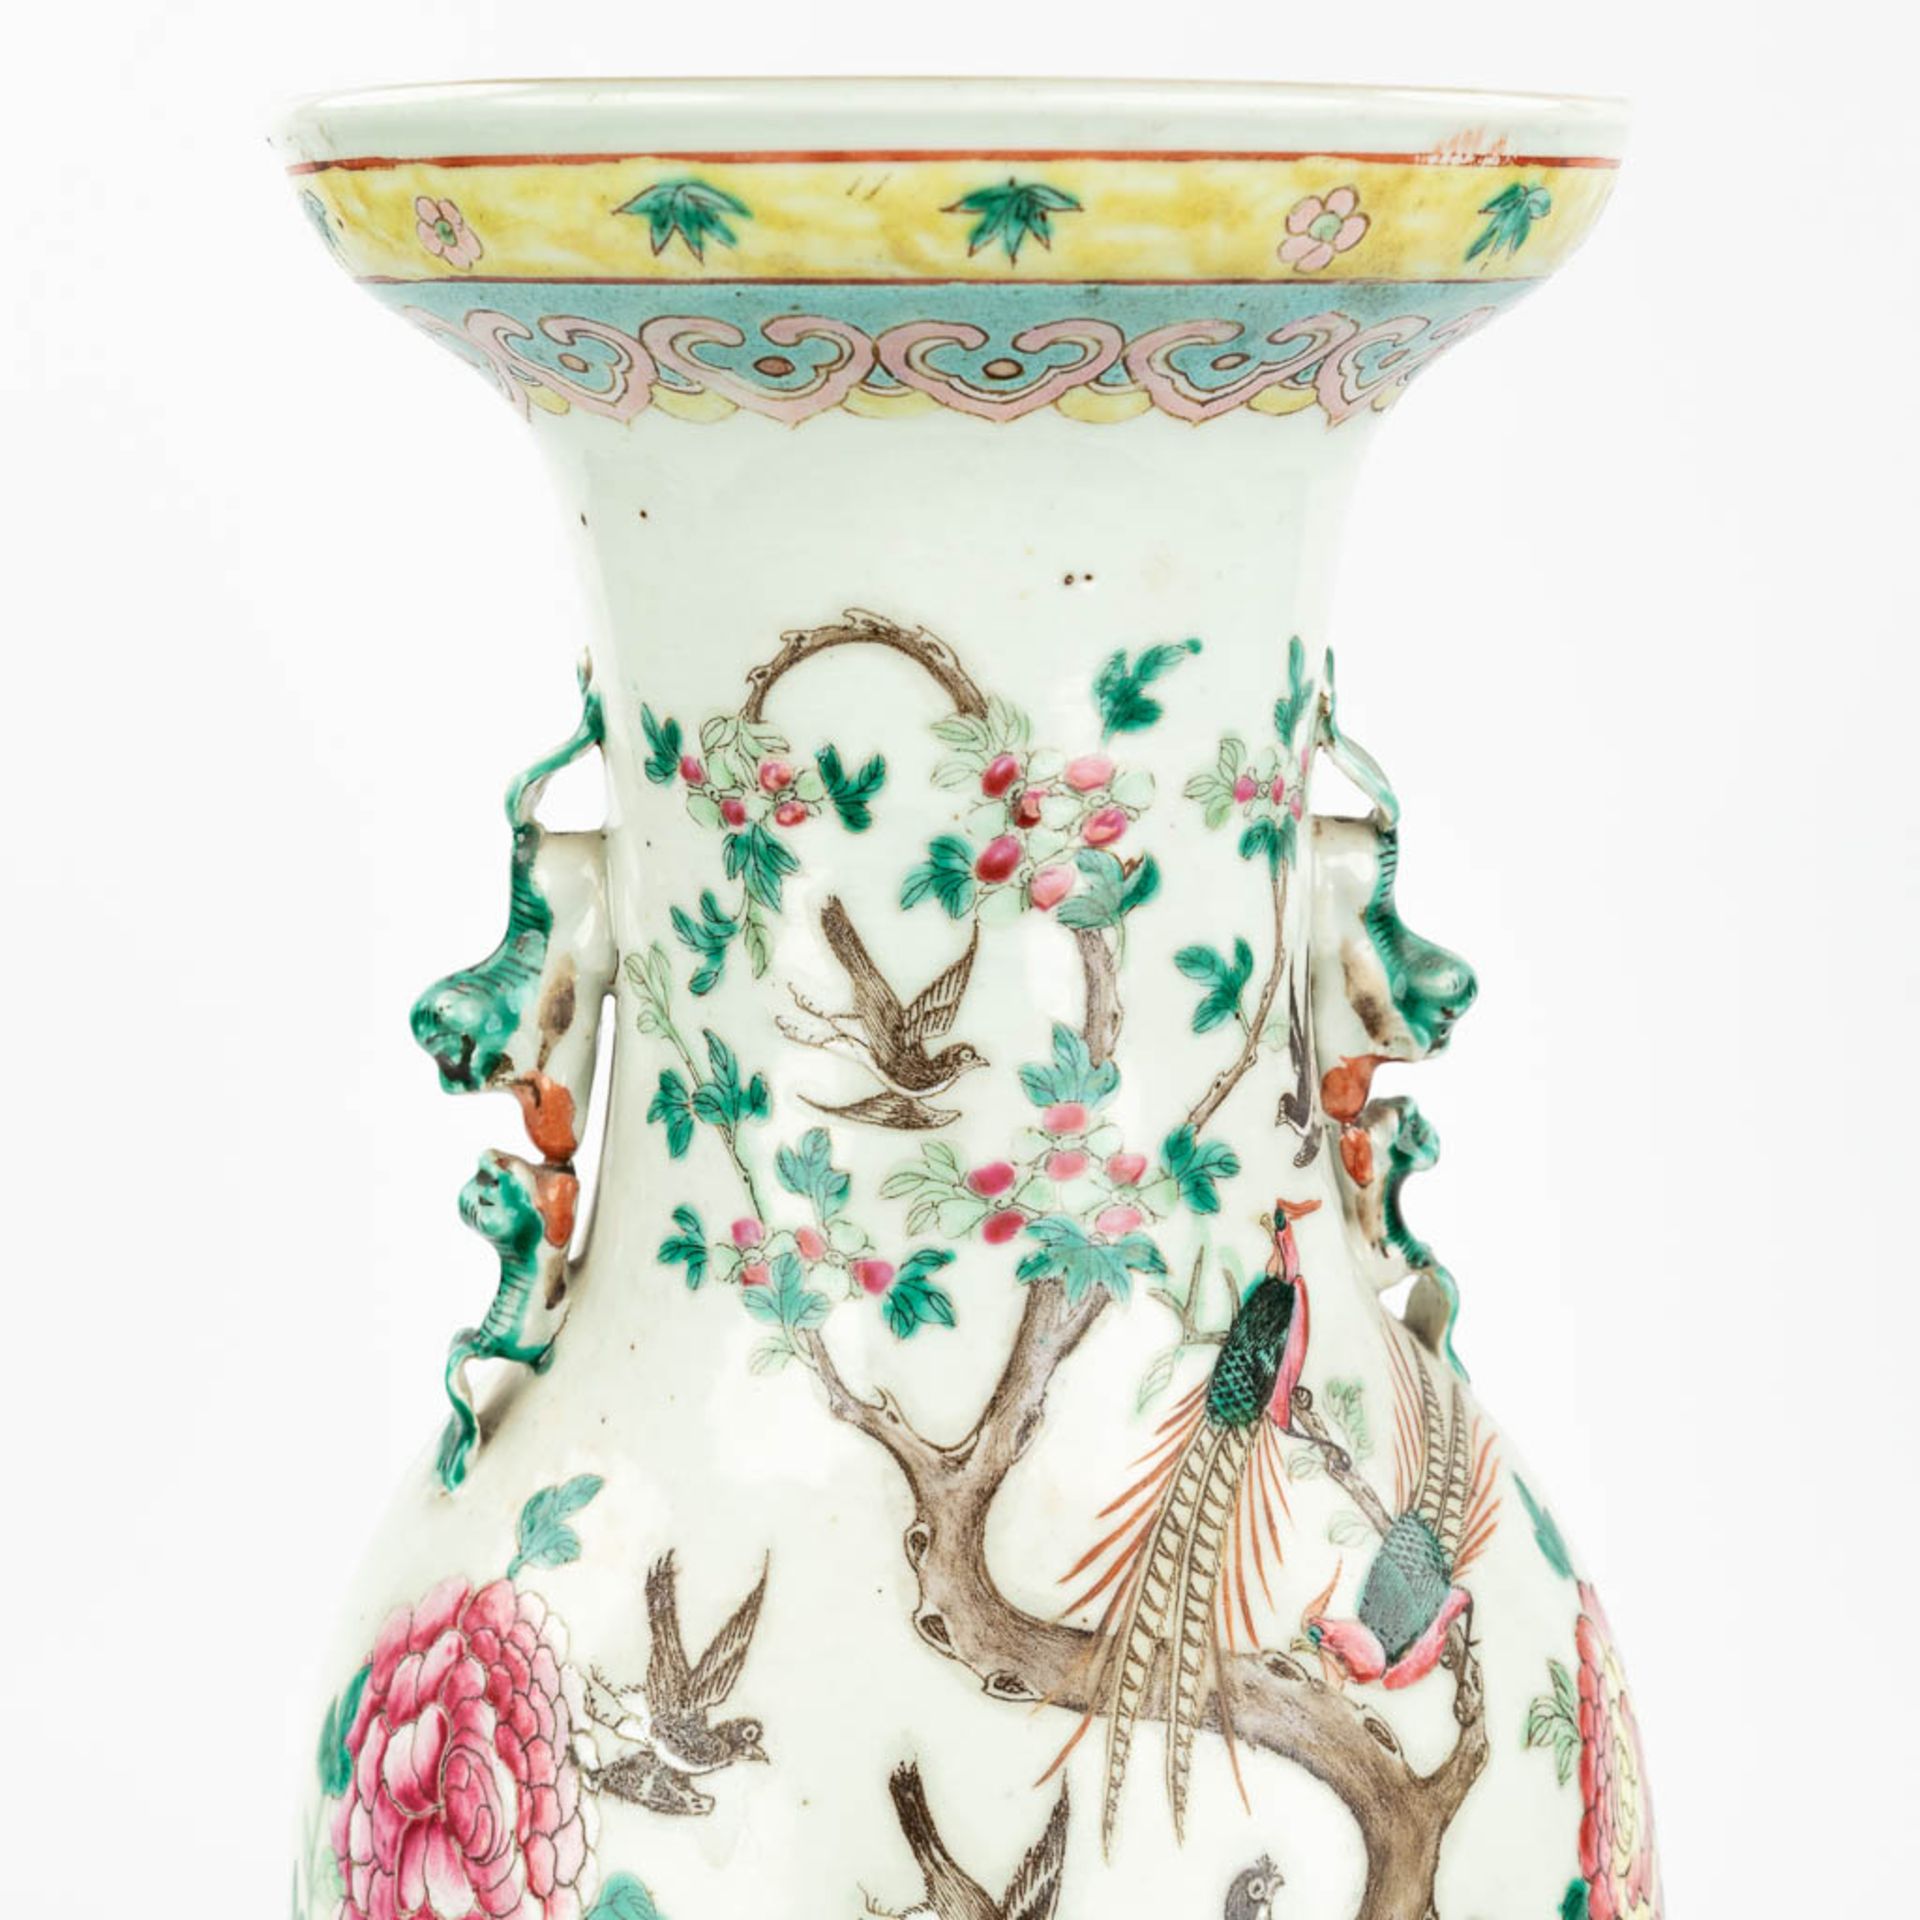 A Chinese vase made of porcelain, decorated with peacocks and birds. (61,5 x 24 cm) - Image 13 of 18